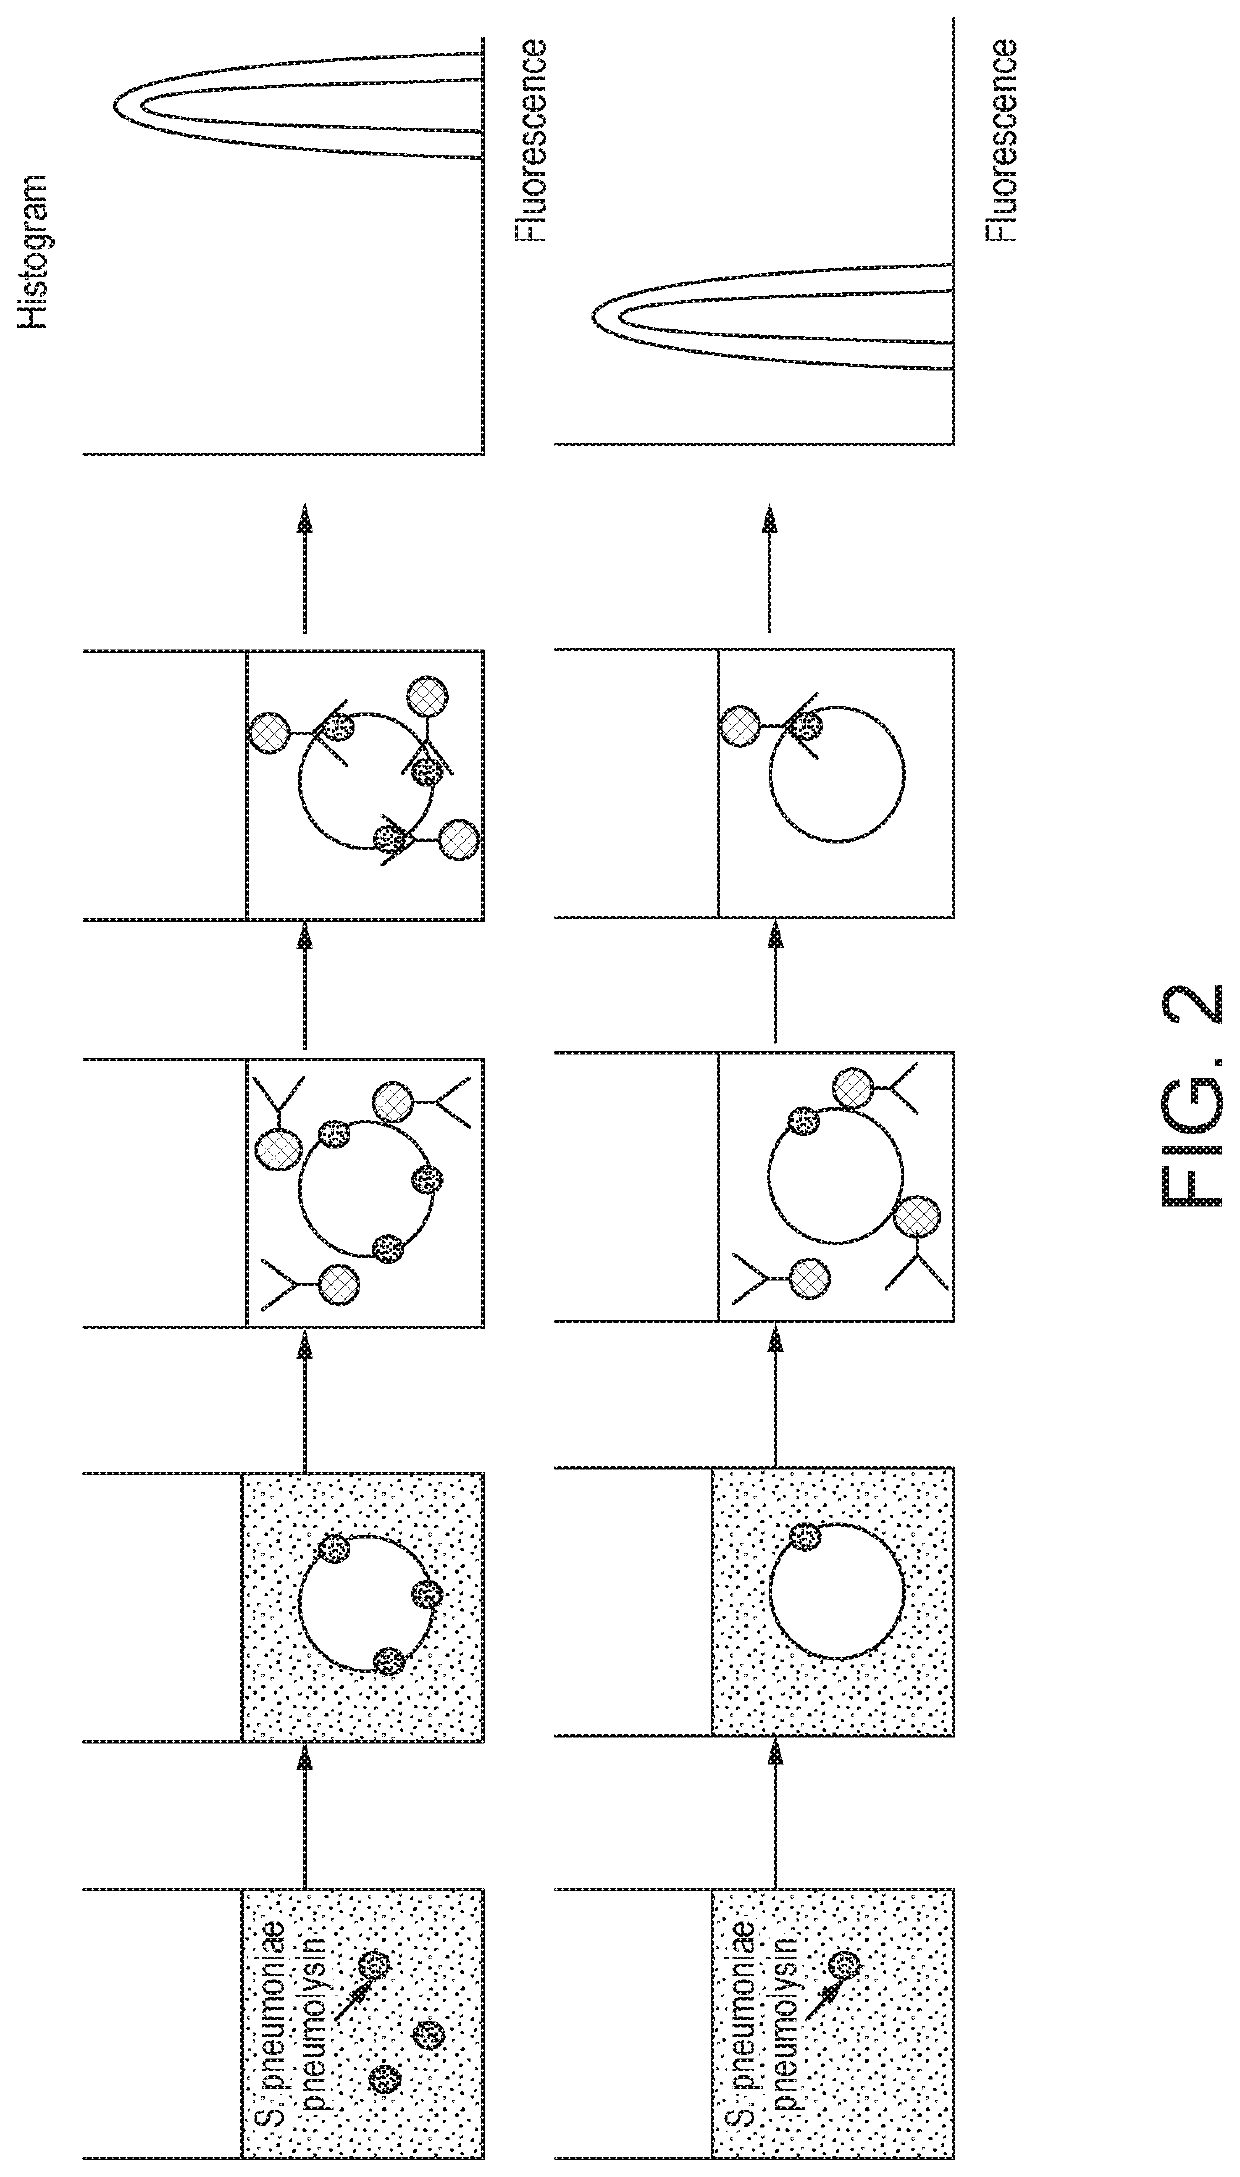 Method for detecting the presence of one or more bacterial toxins in a biological fluid using liposomes